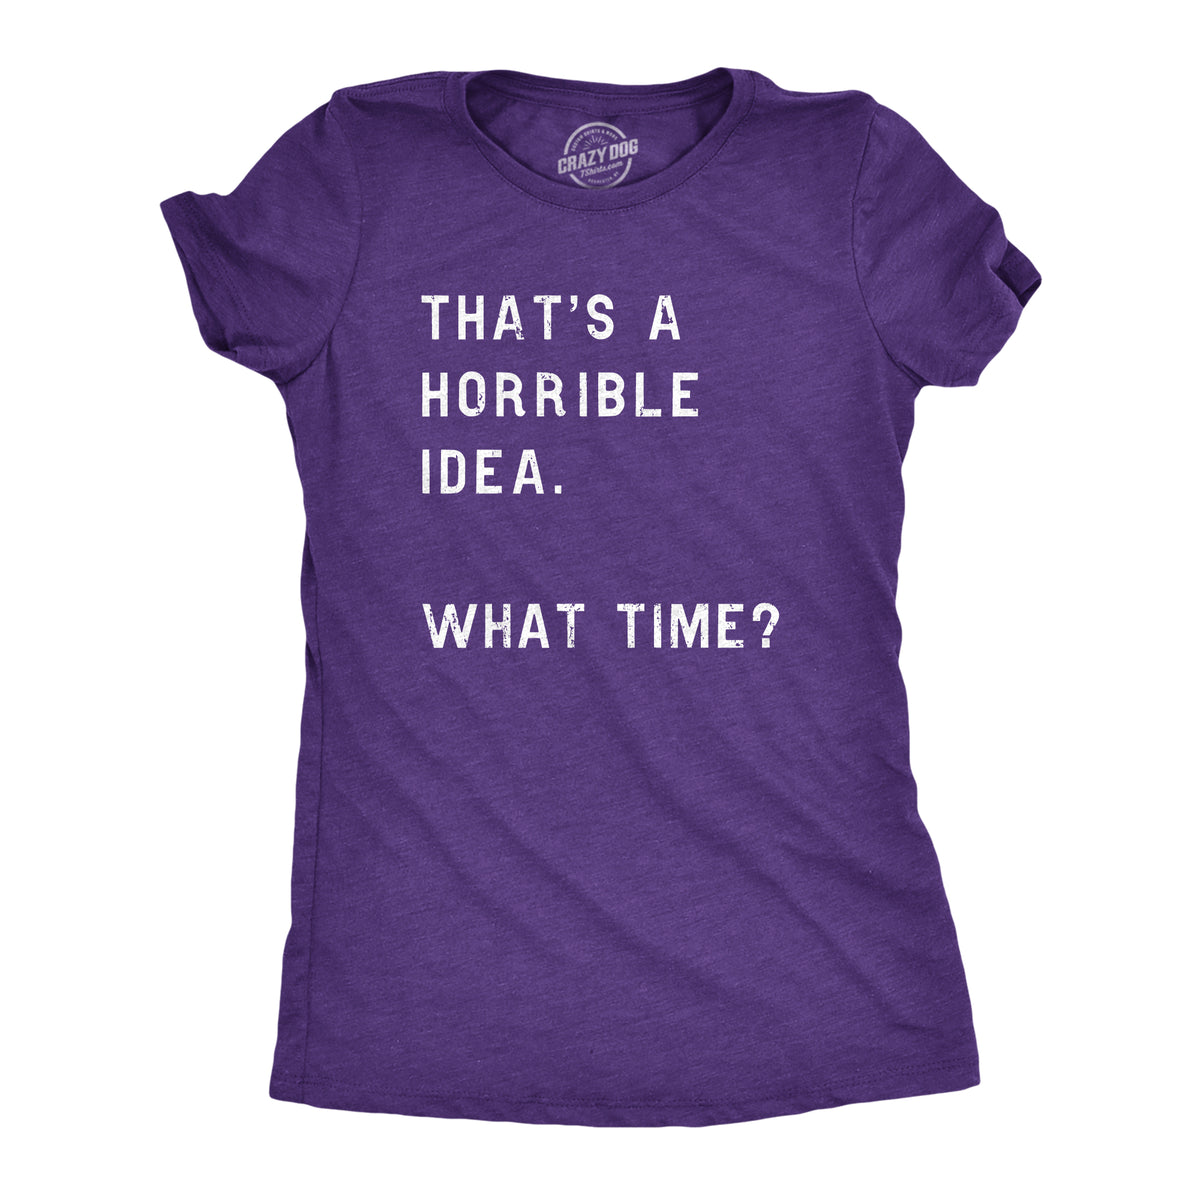 Funny Heather Purple That Sounds Like A Horrible Idea. What Time? Womens T Shirt Nerdy Sarcastic Tee